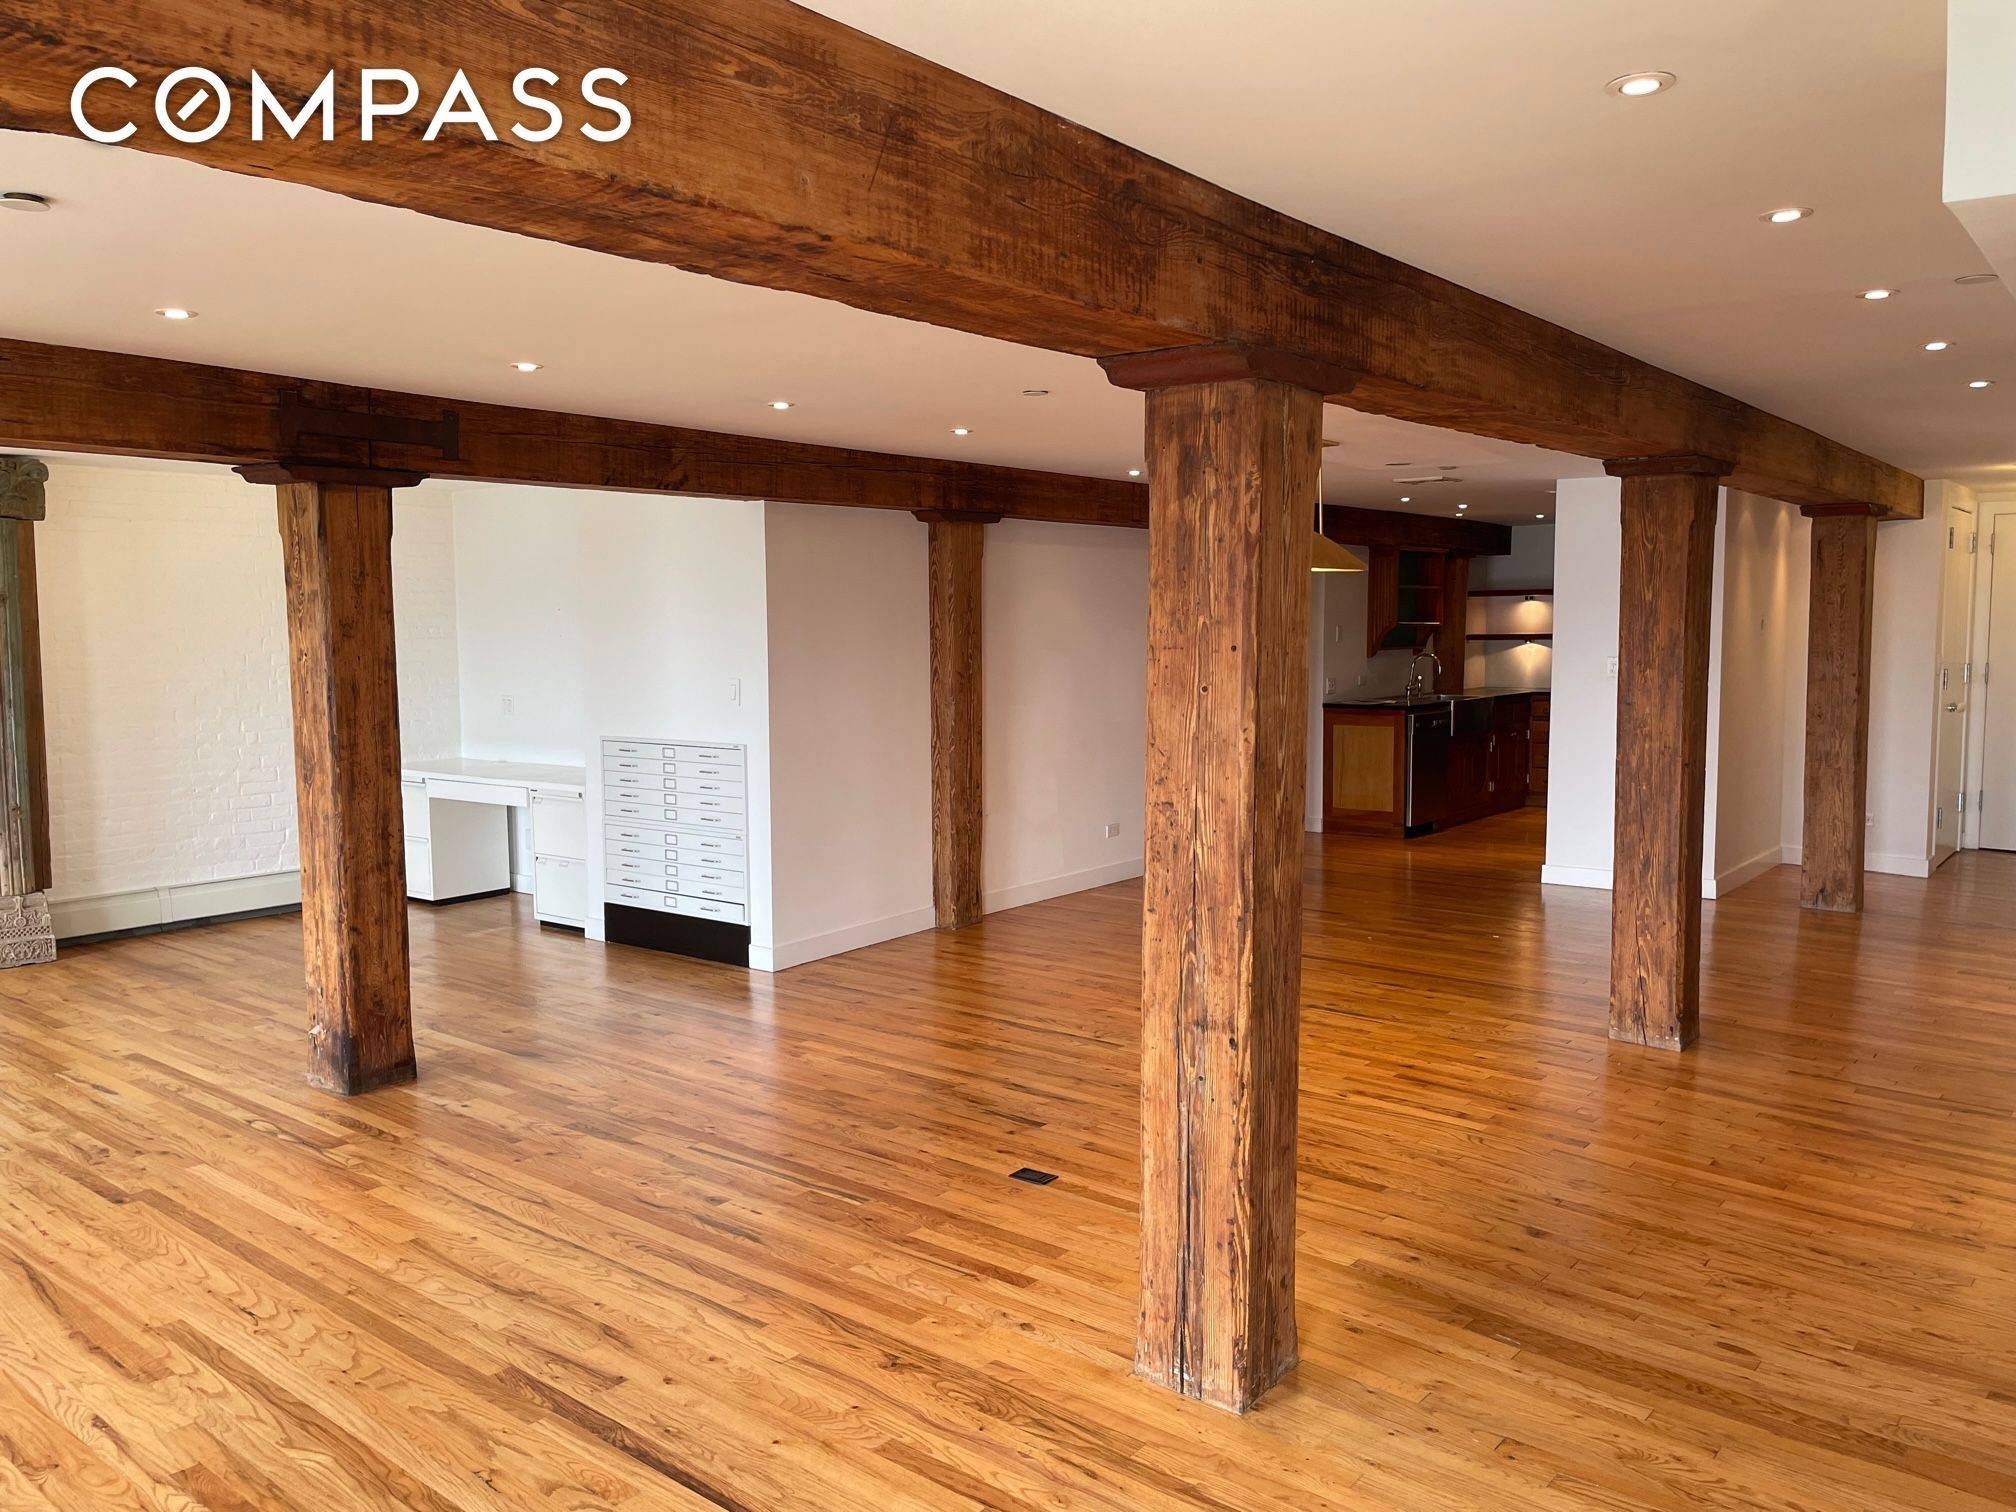 The perfect, relaxing loft to come home to and watch the sun set this QUIET 2 bedroom, 2 full bath loft was created in a converted spice warehouse and offers ...